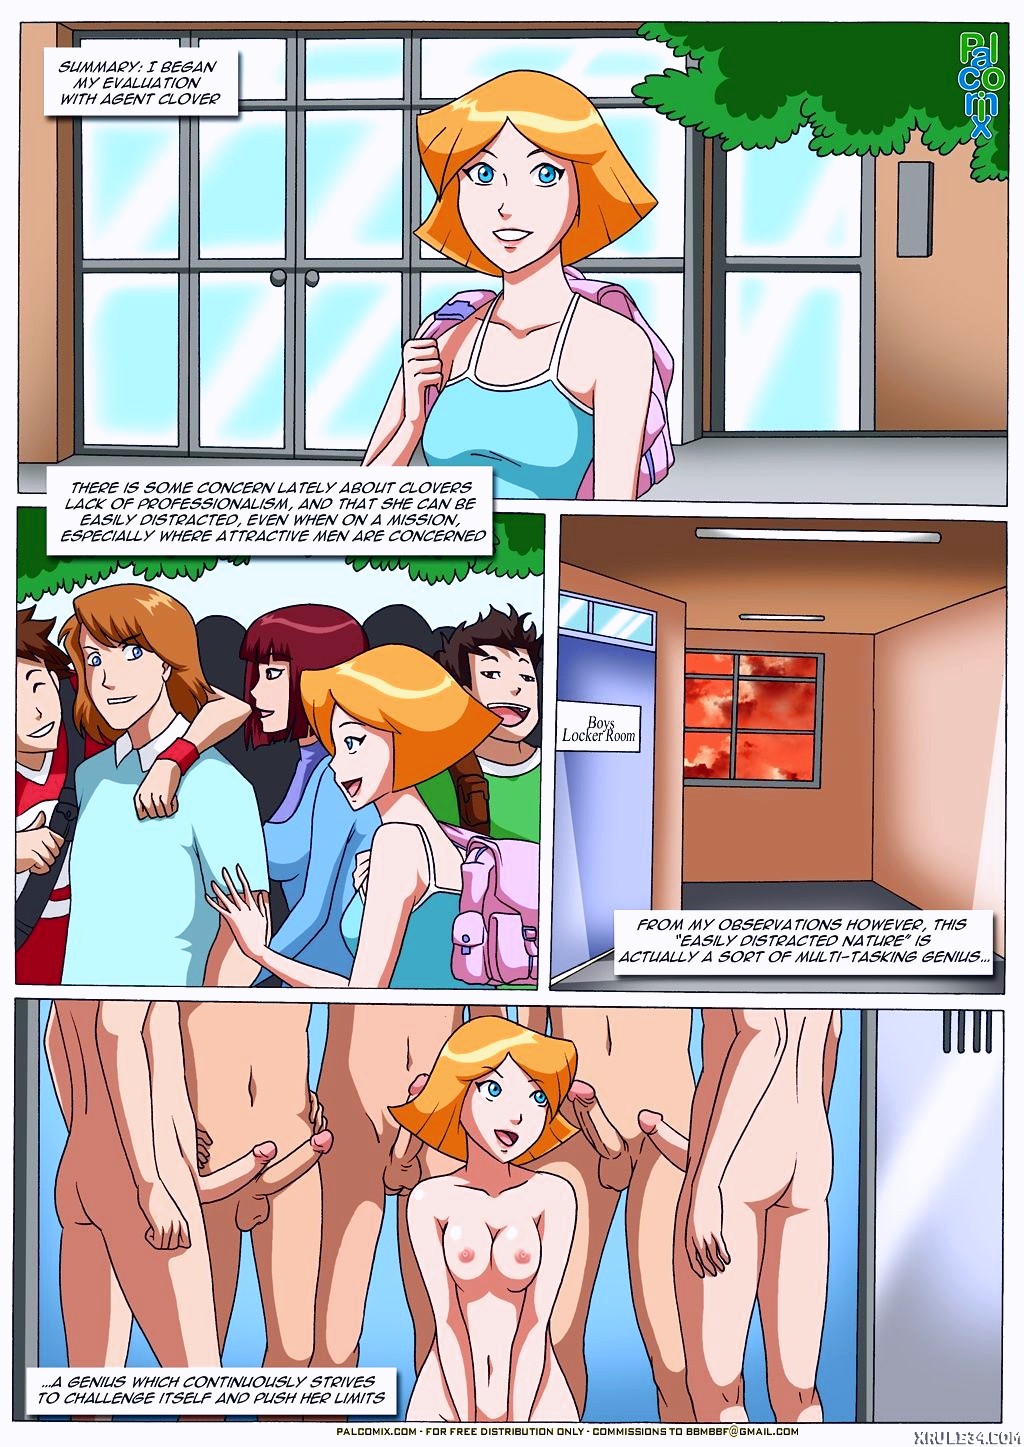 Deep Cover Evaluation porn comic page 015